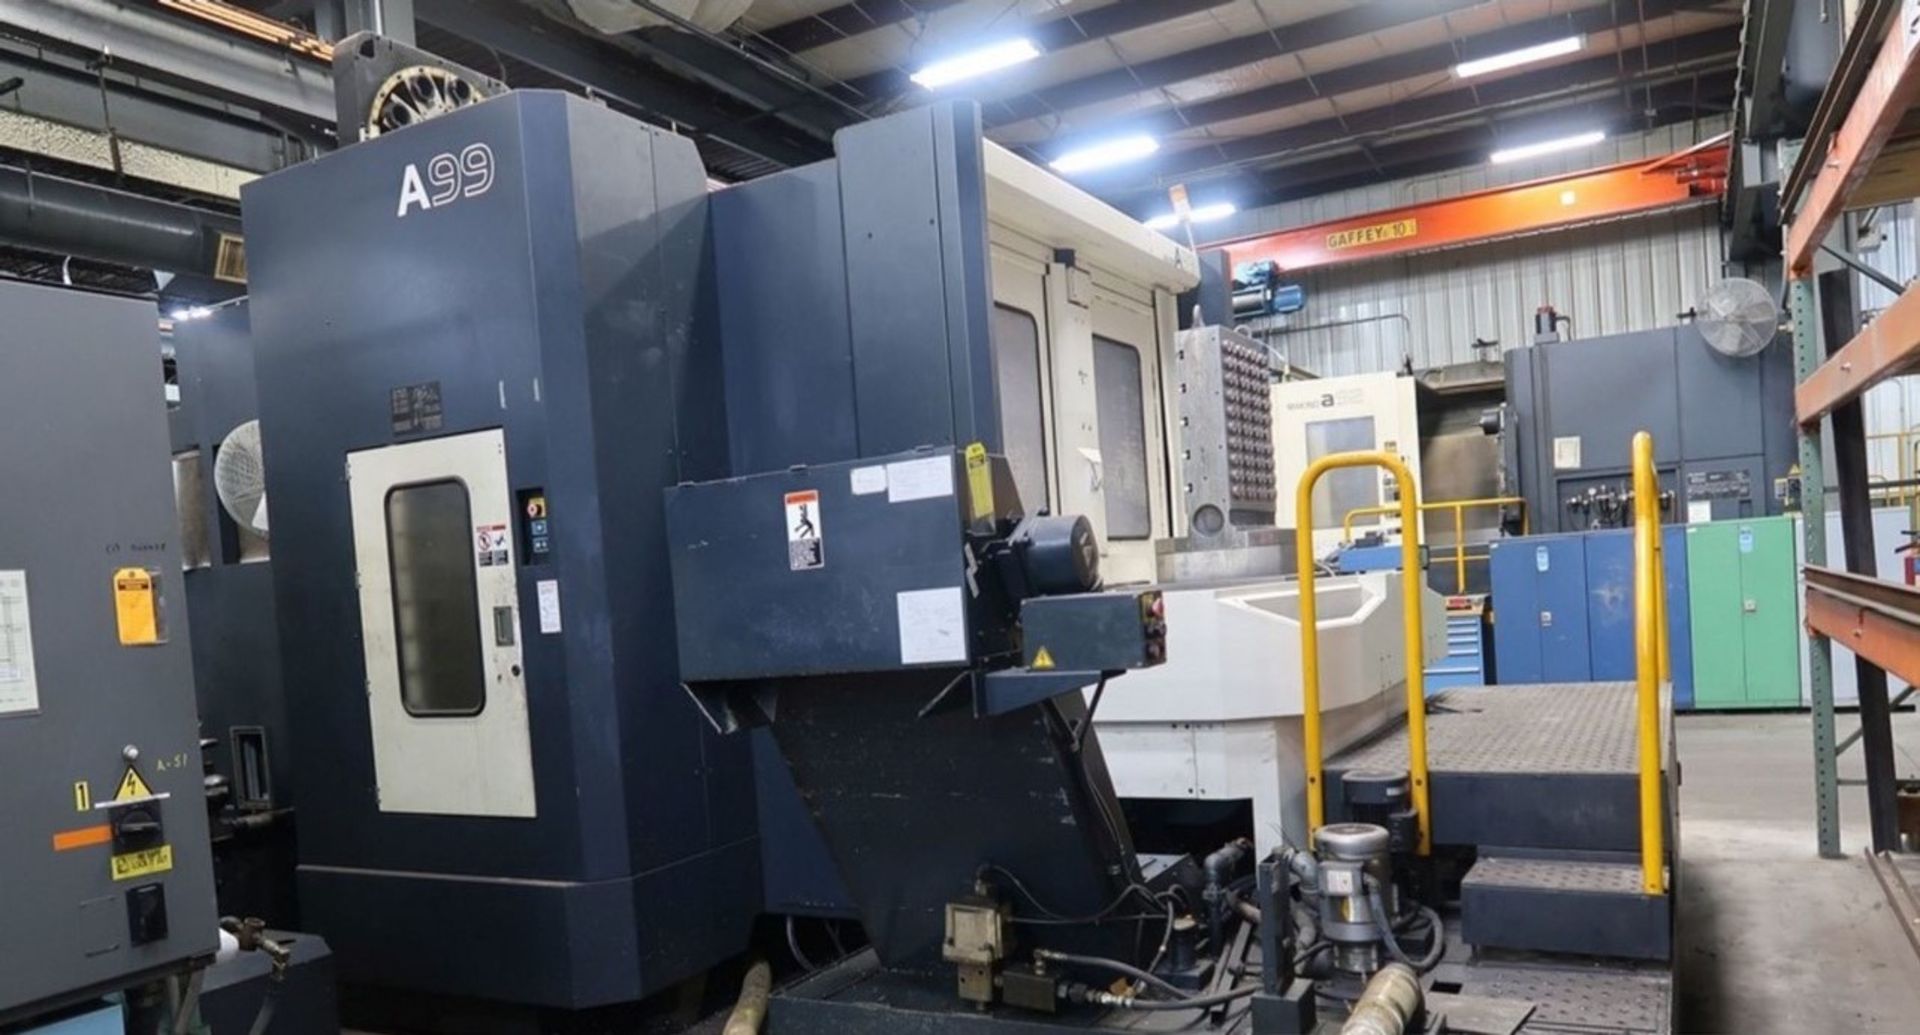 Makino A99 CNC Horizontal Machining Center w/ (2) Tombstones: Electro-Permanent Magnetic Chucks... - Image 7 of 27